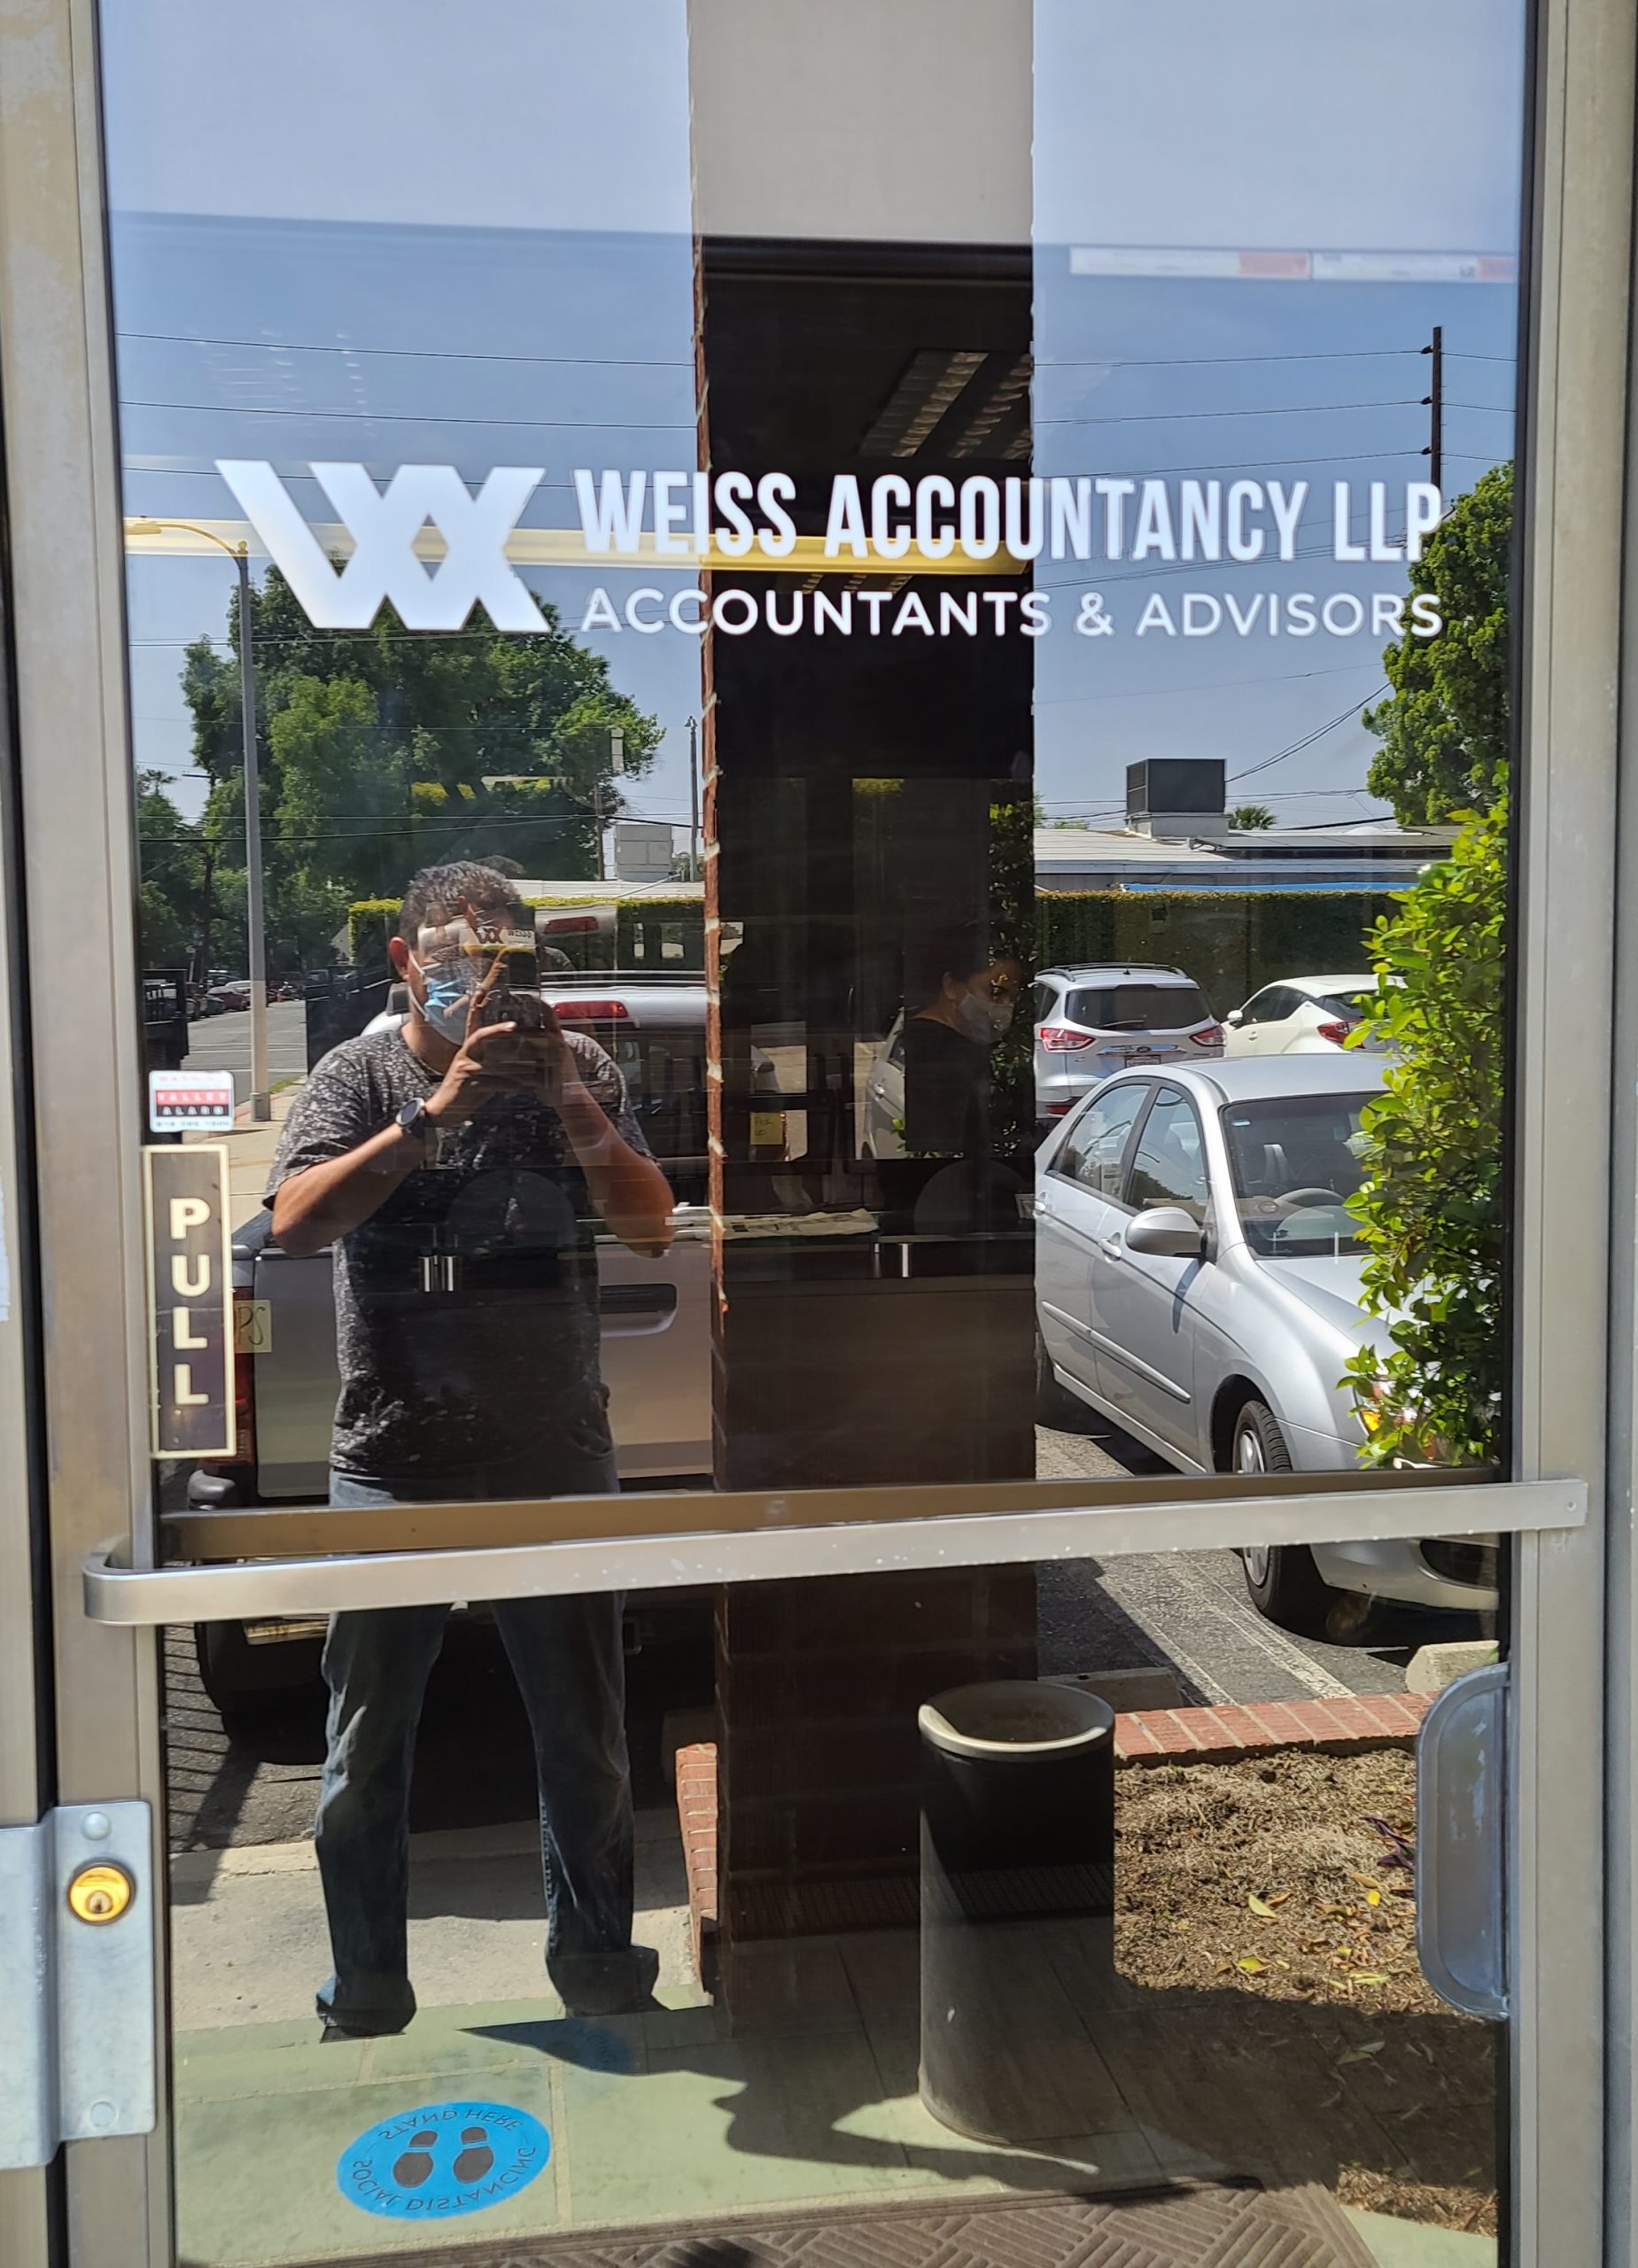 More signs made and installed for Weiss Accountancy. This time it is a window graphic business sign package that thoroughly decorates their Van Nuys office.